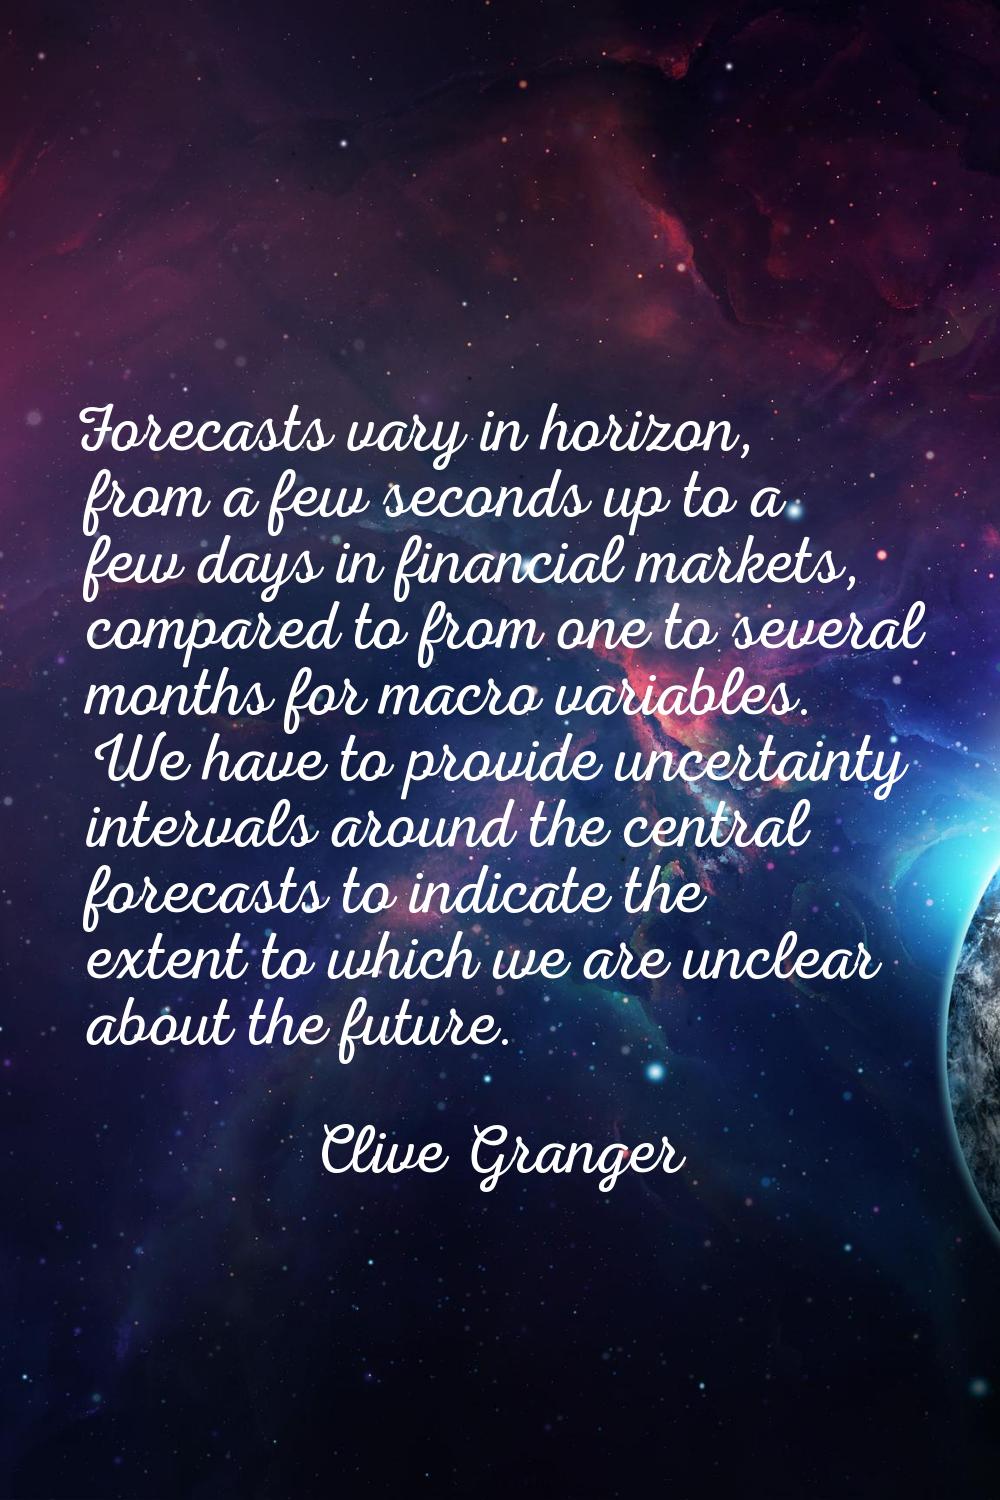 Forecasts vary in horizon, from a few seconds up to a few days in financial markets, compared to fr